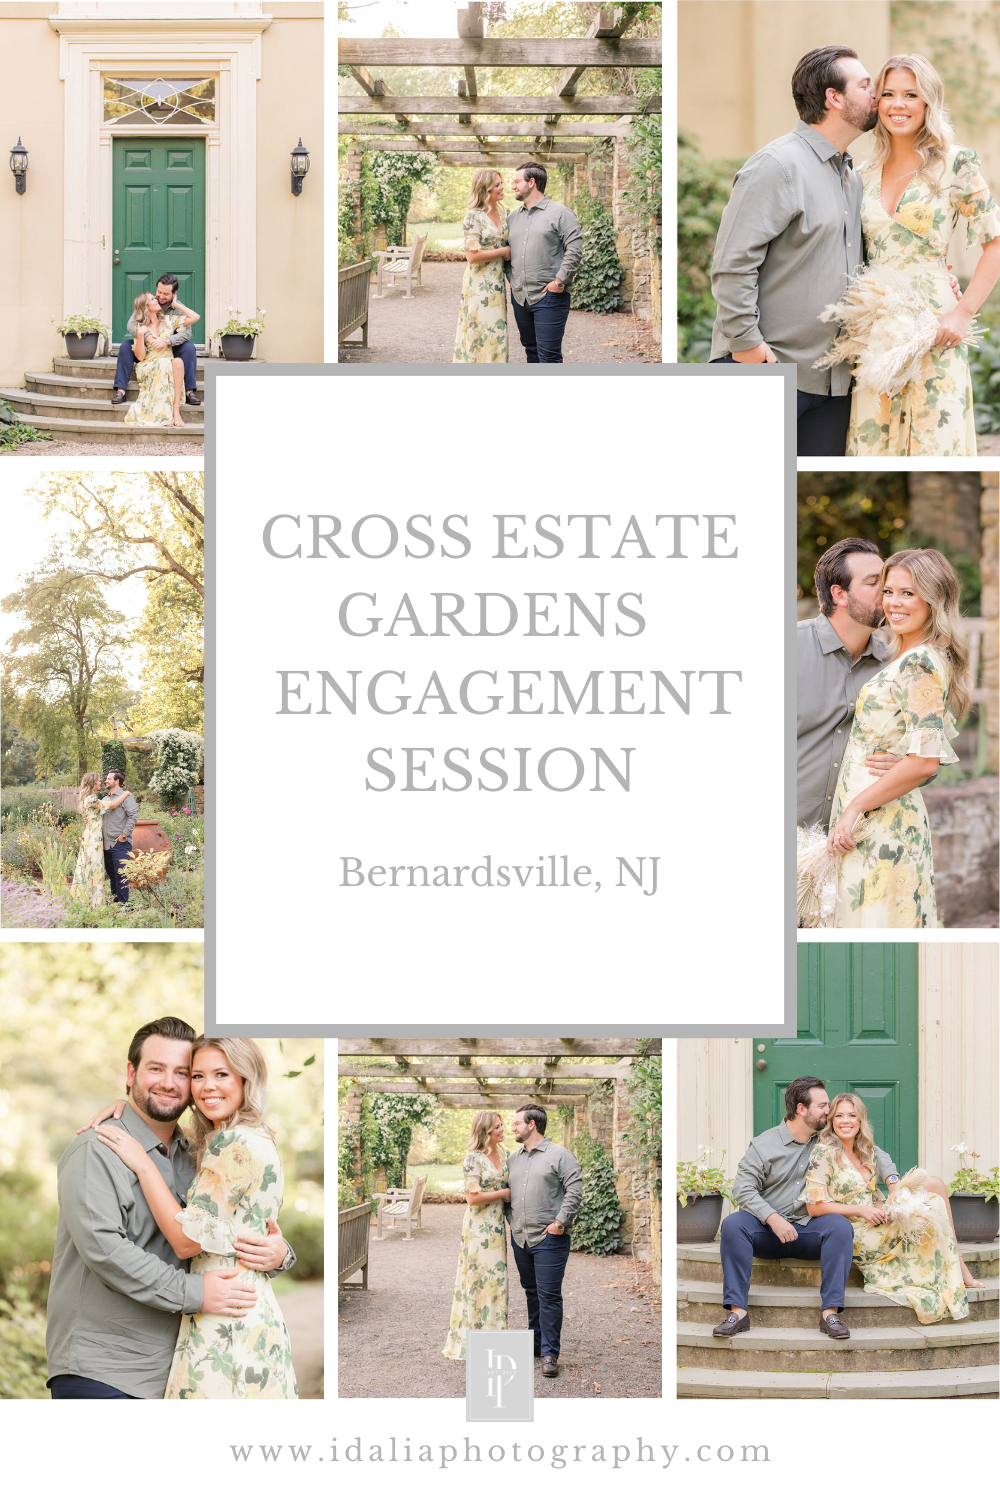 Cross Estate Gardens Engagement Session with Idalia Photography